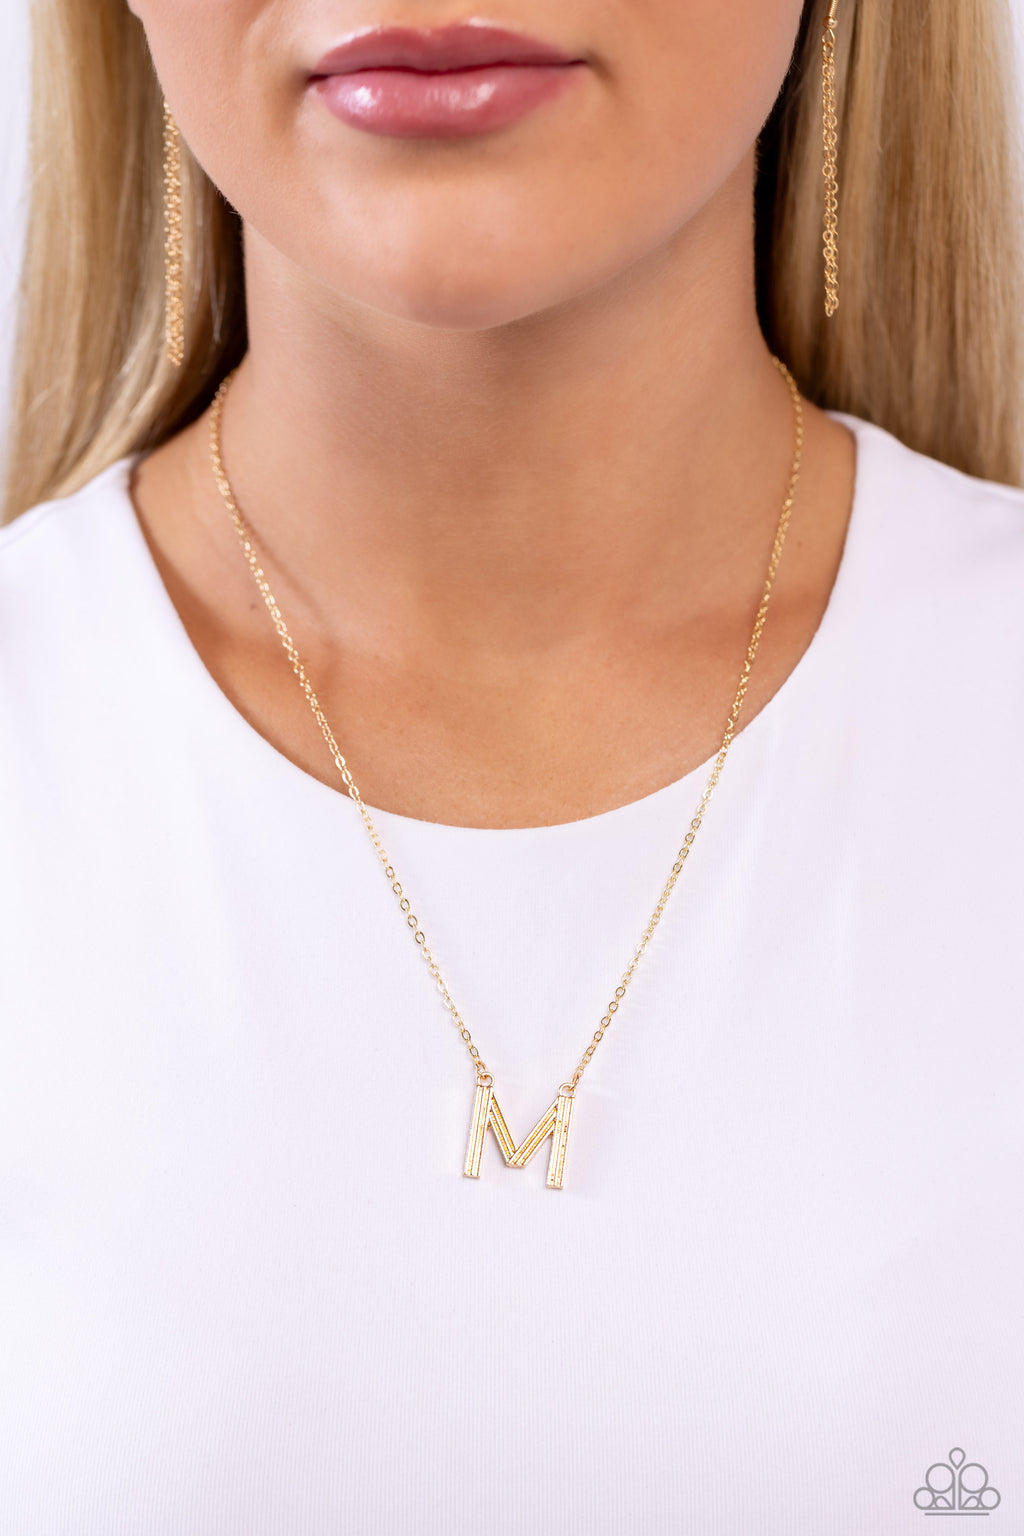 Paparazzi - Leave Your Initials - Gold - M Necklace